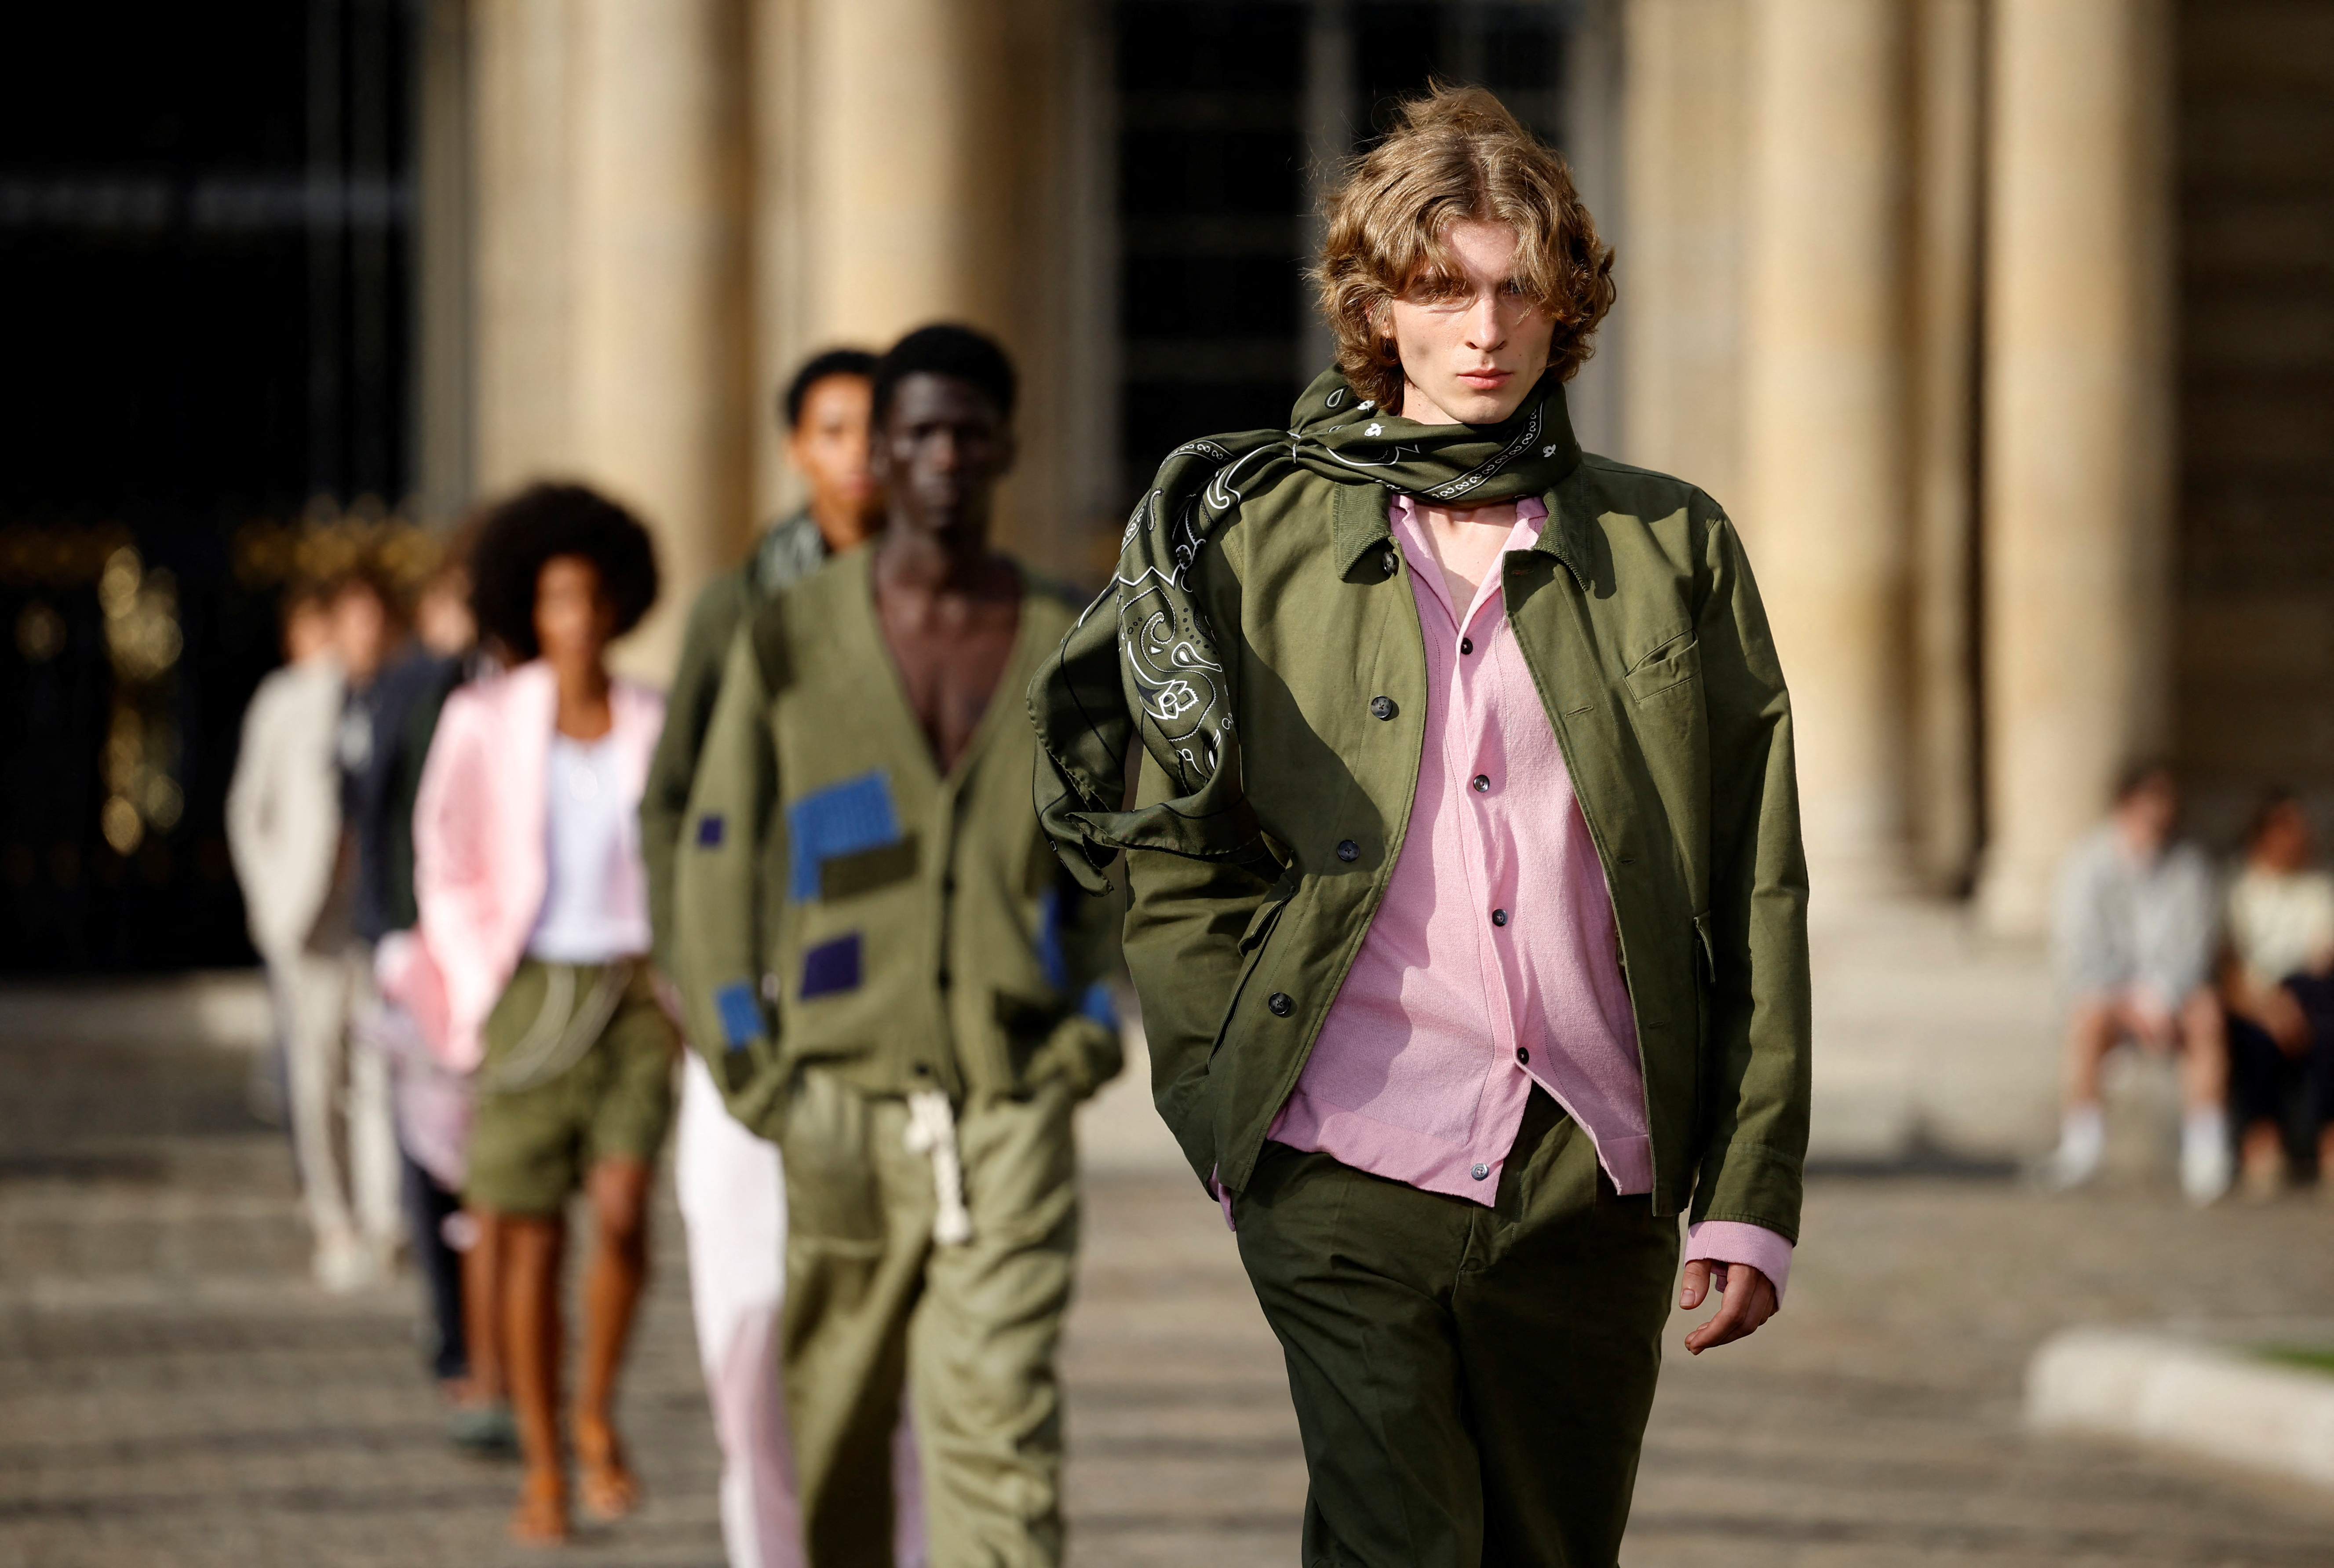 Officine Generale collection show during Men's Fashion Week in Paris